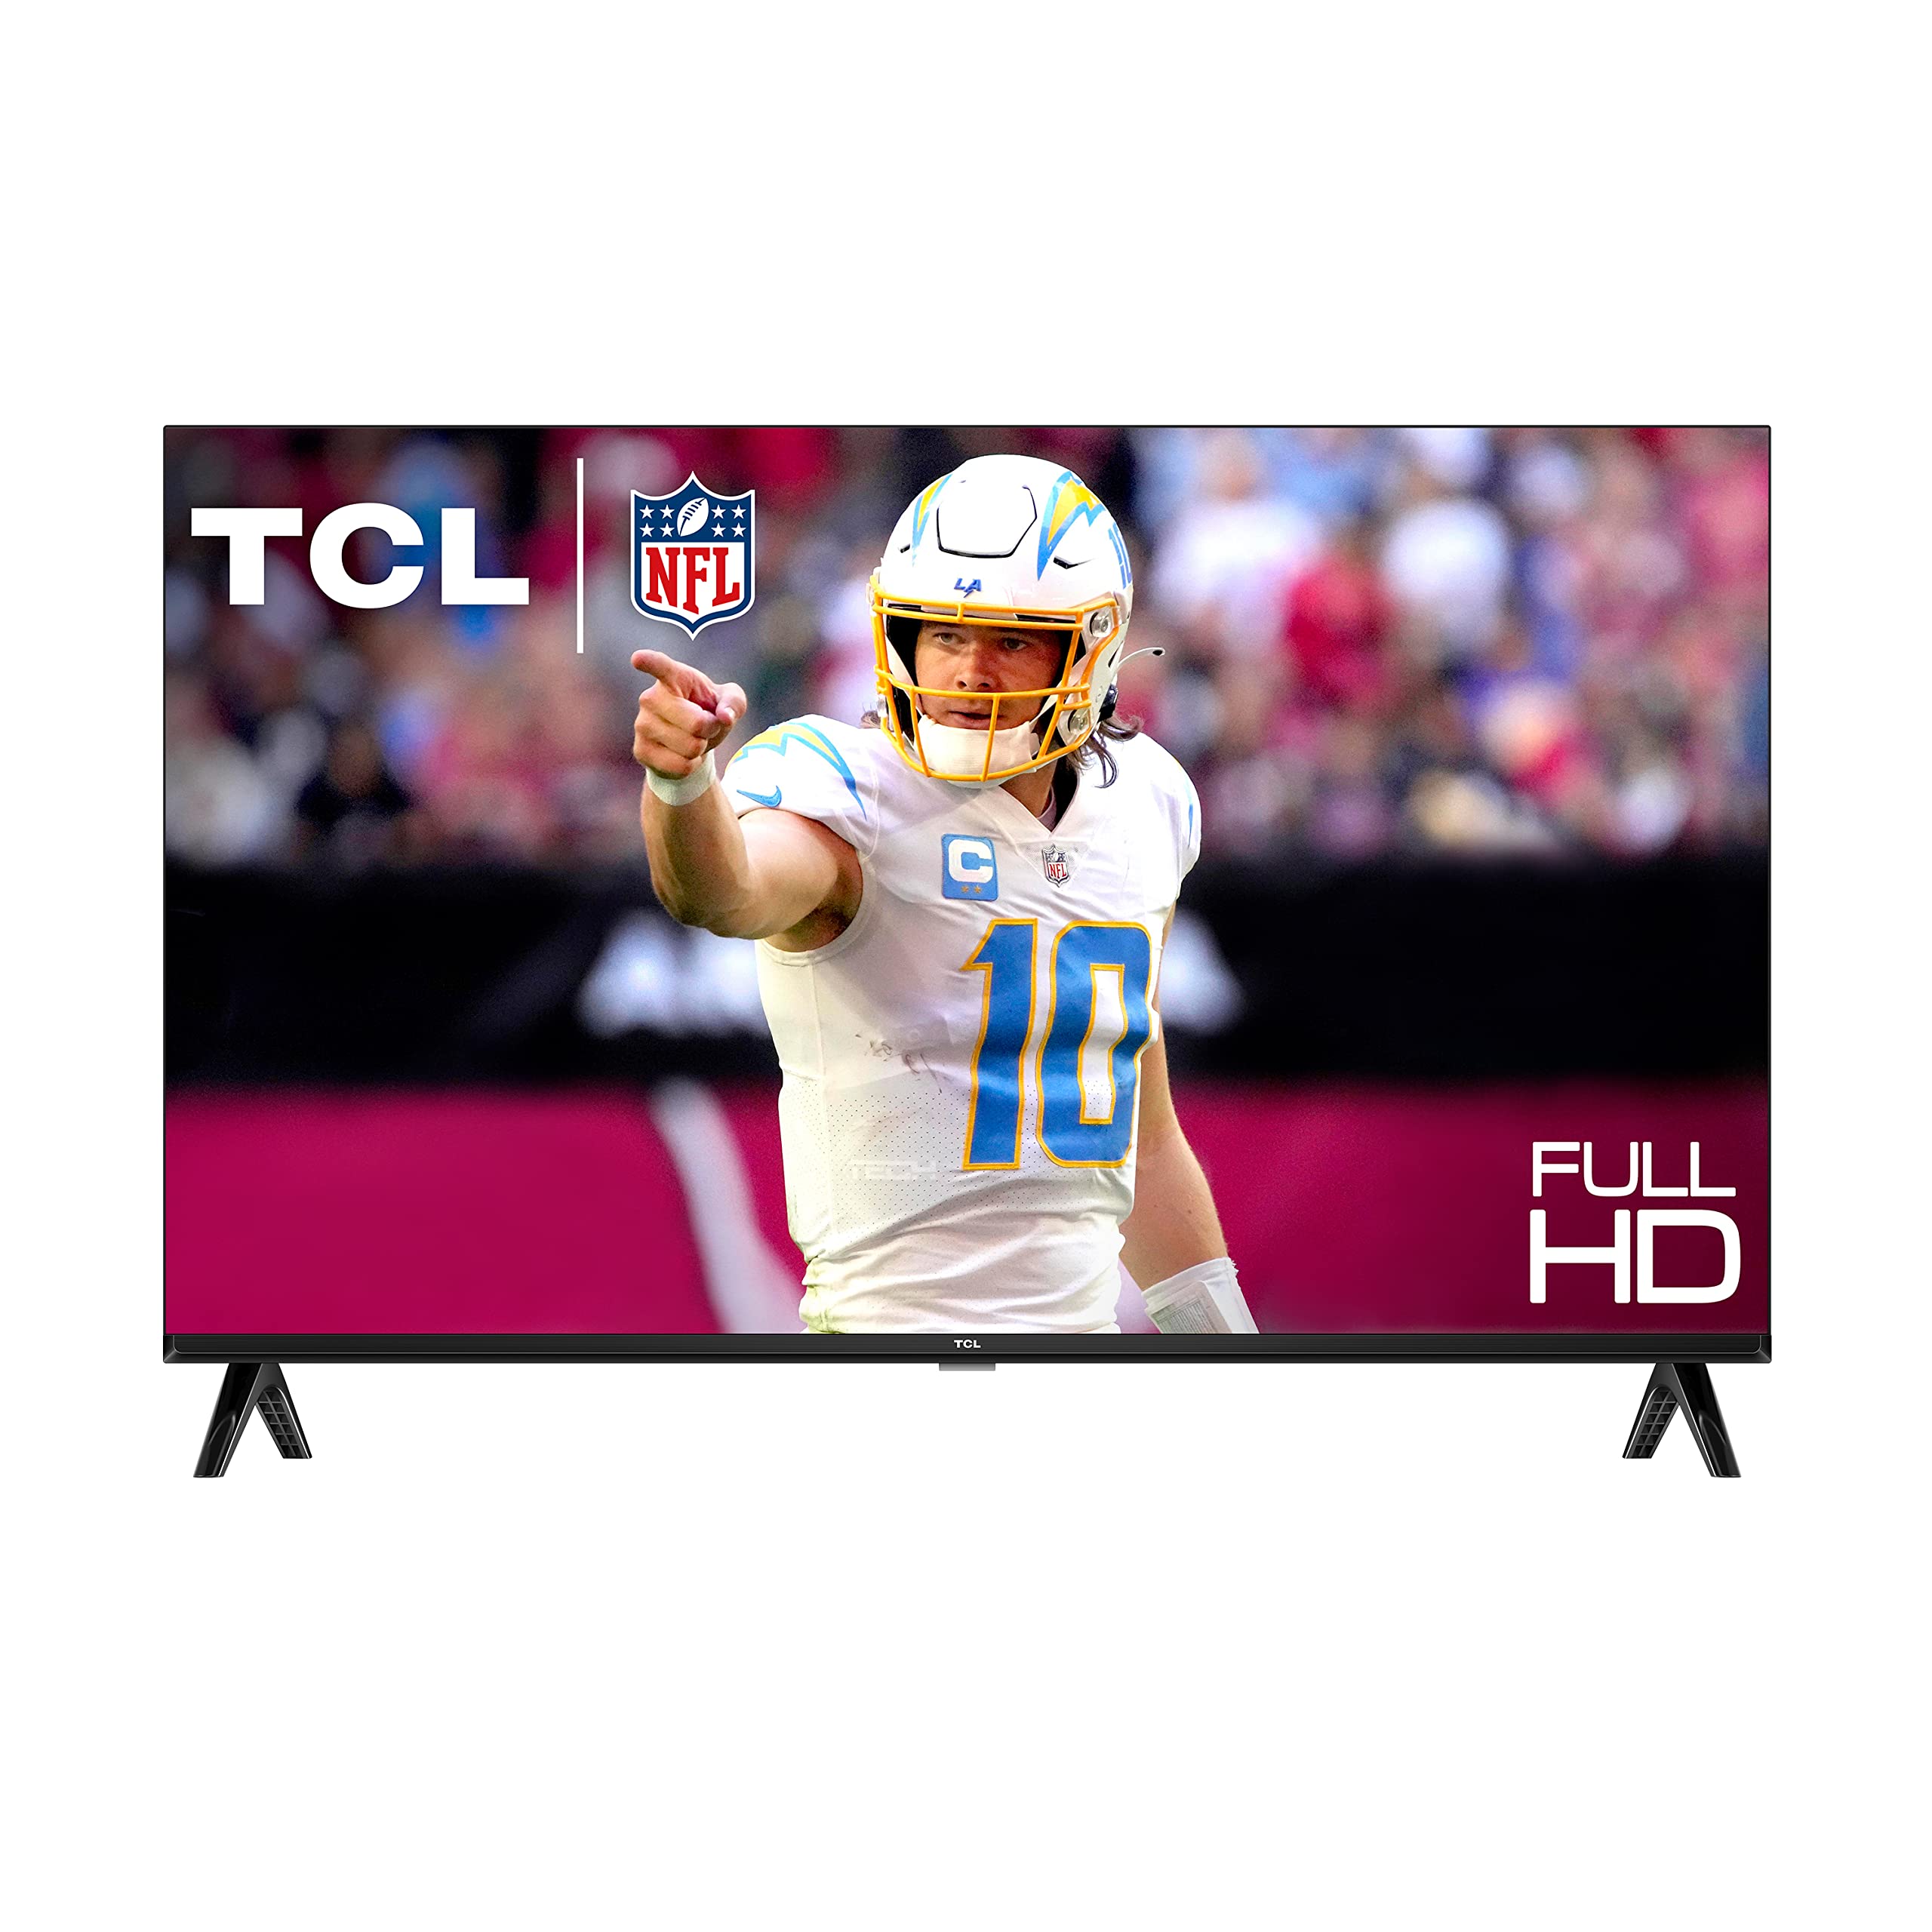 TCL 32-Inch Smart TV